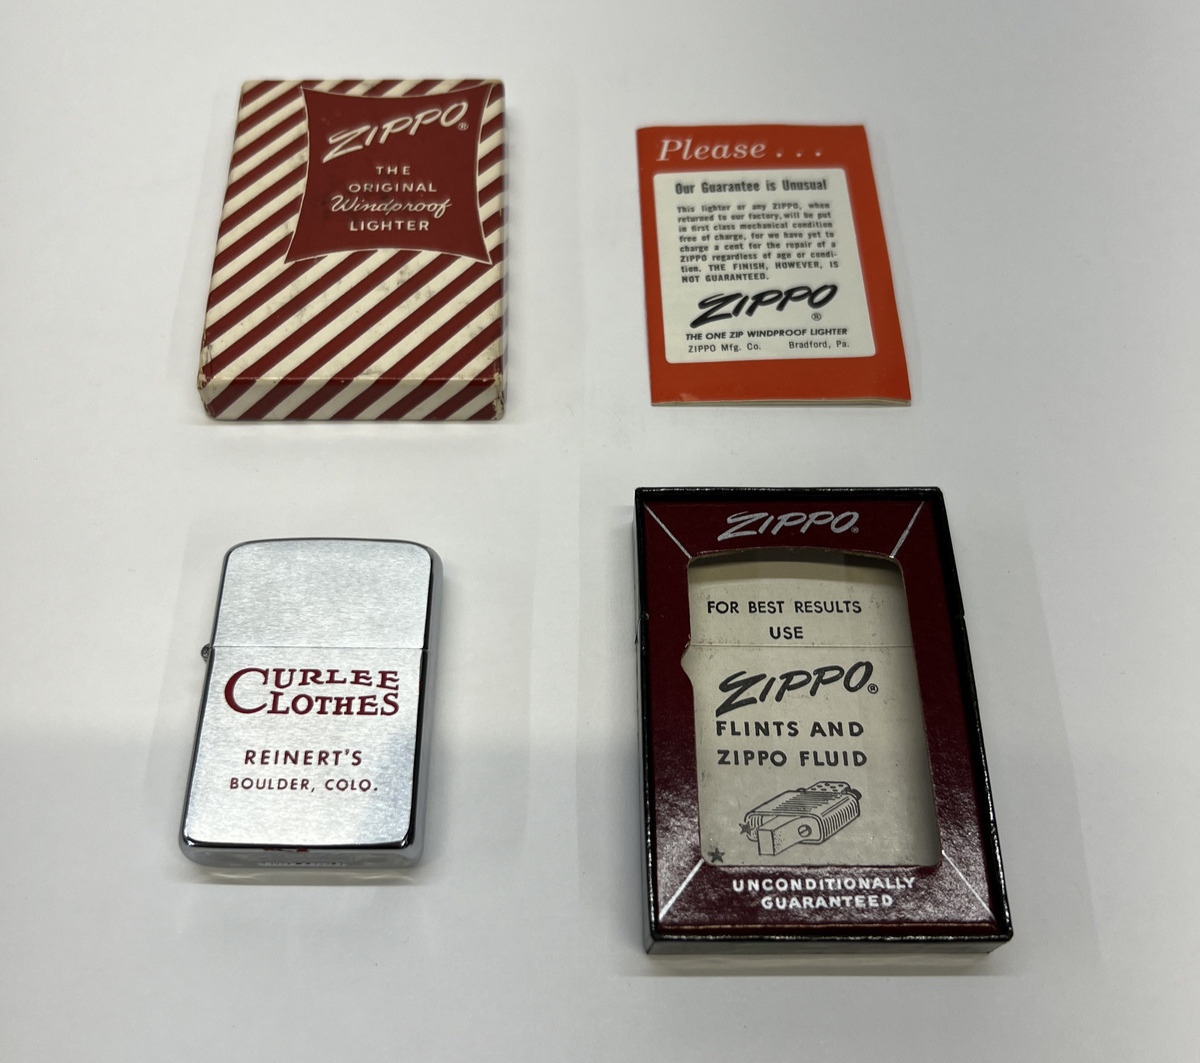 Rare Vintage 1950's Zippo Lighter - Unfired. In Box - Curlee Clothes. Colorado